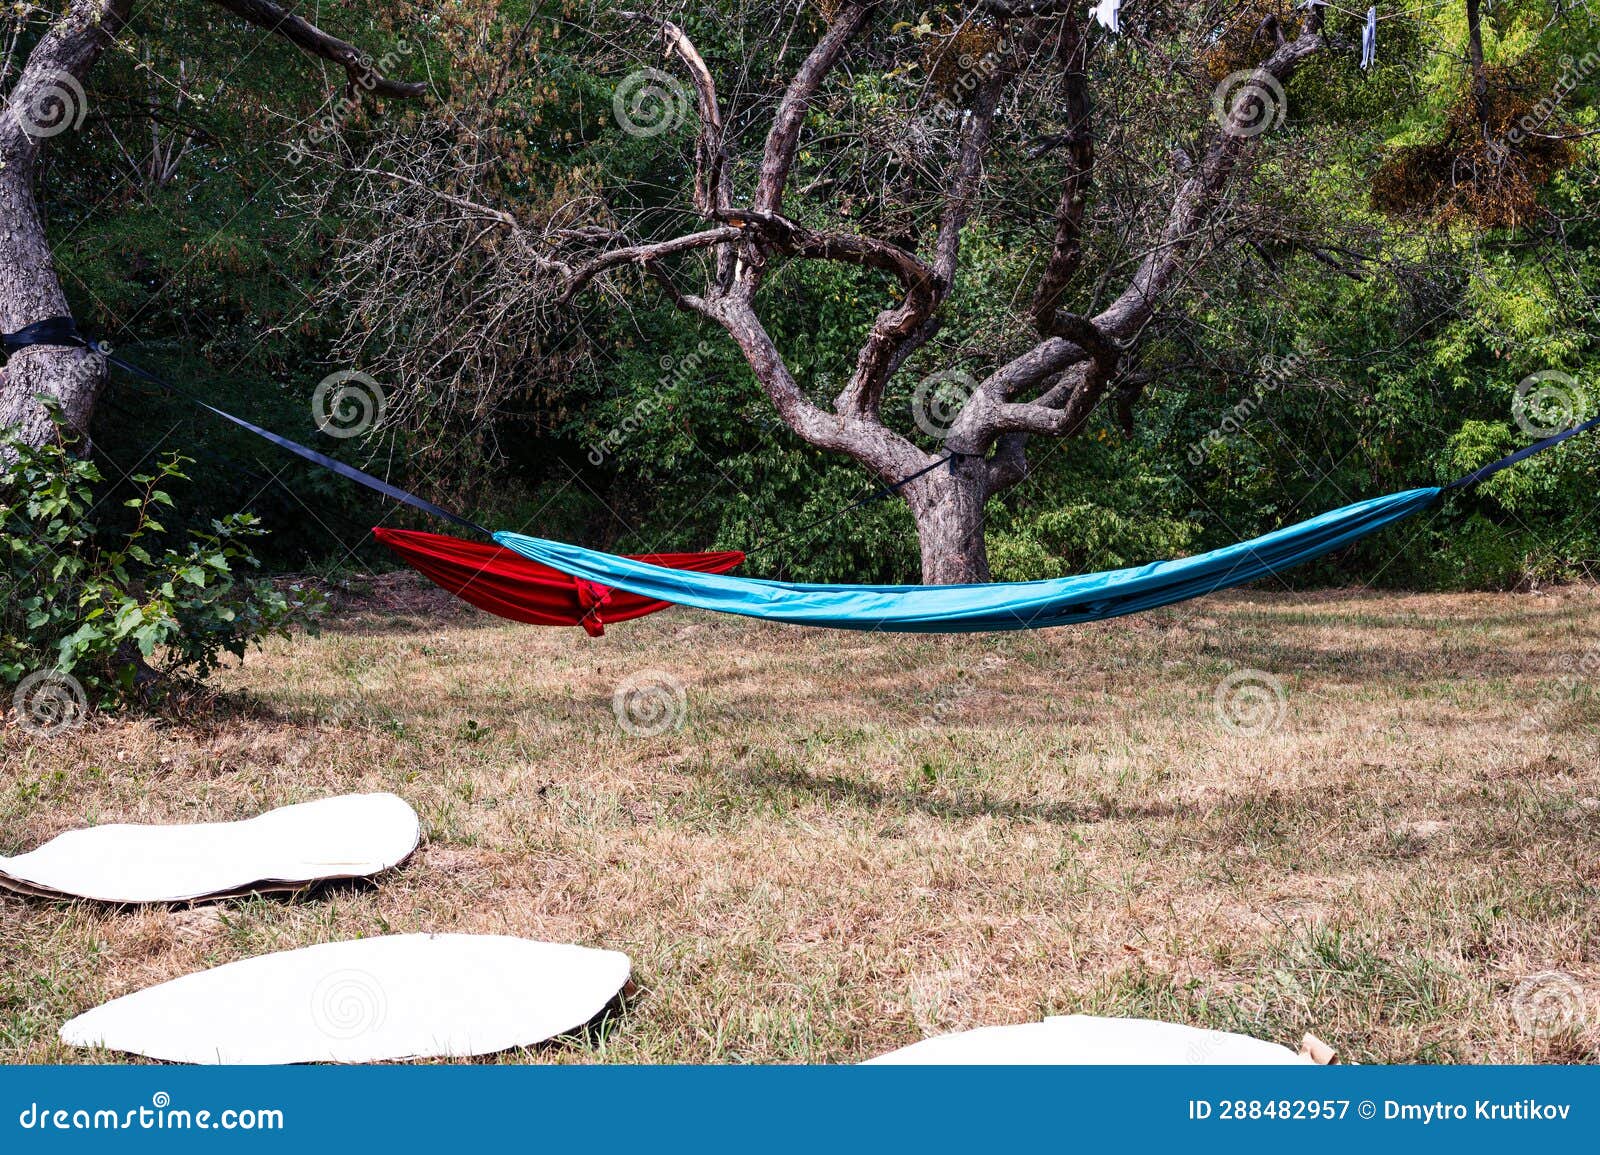 blue hammock and red hammock, white circules on the grass.